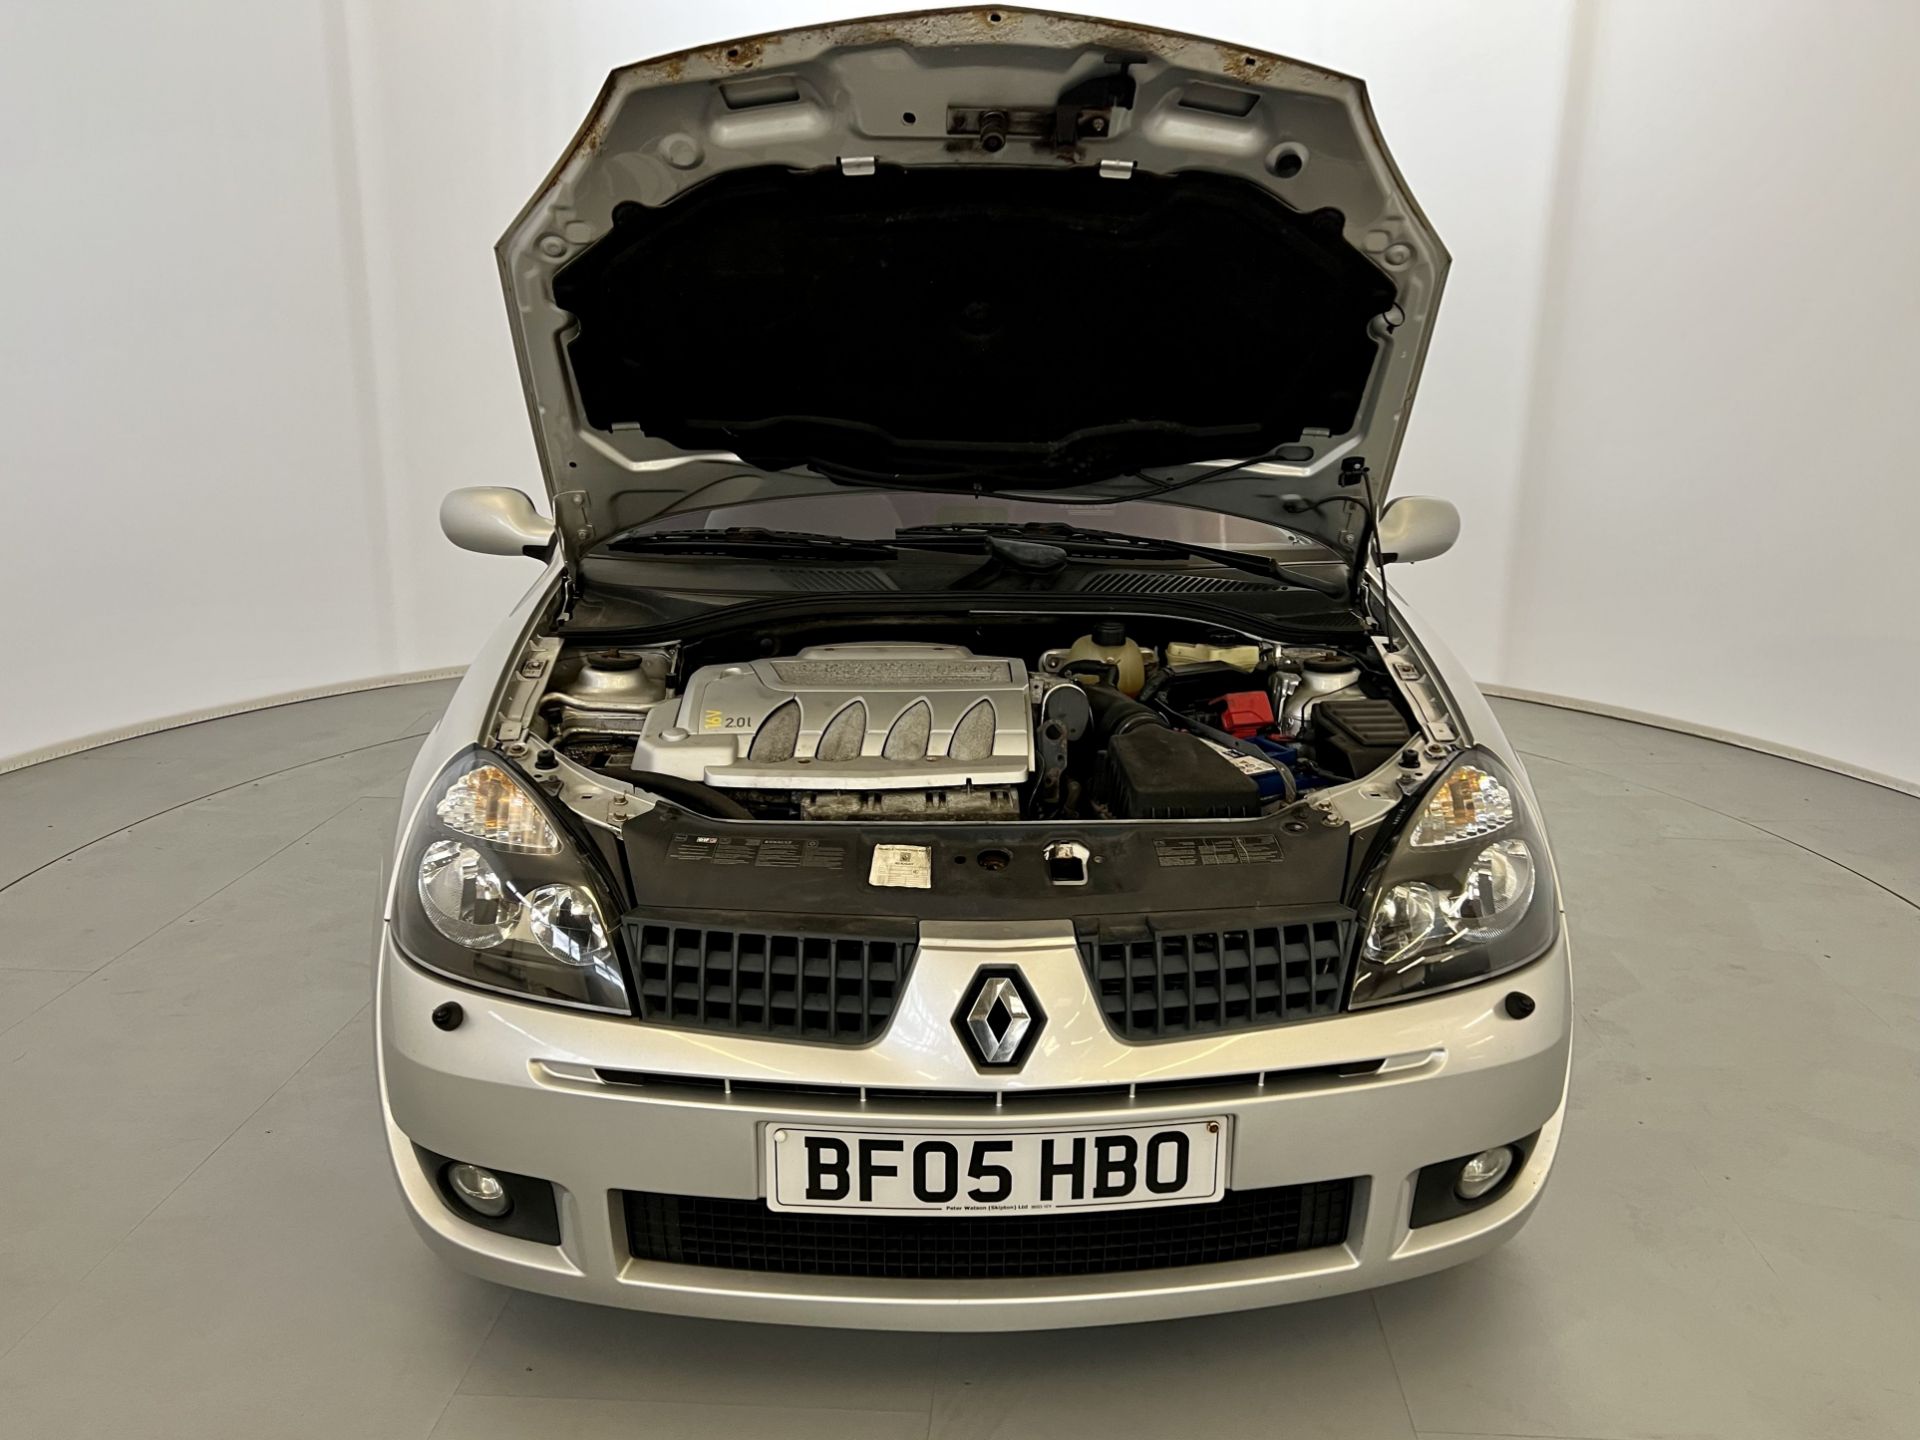 Renault Clio 182 Cup - Image 30 of 31